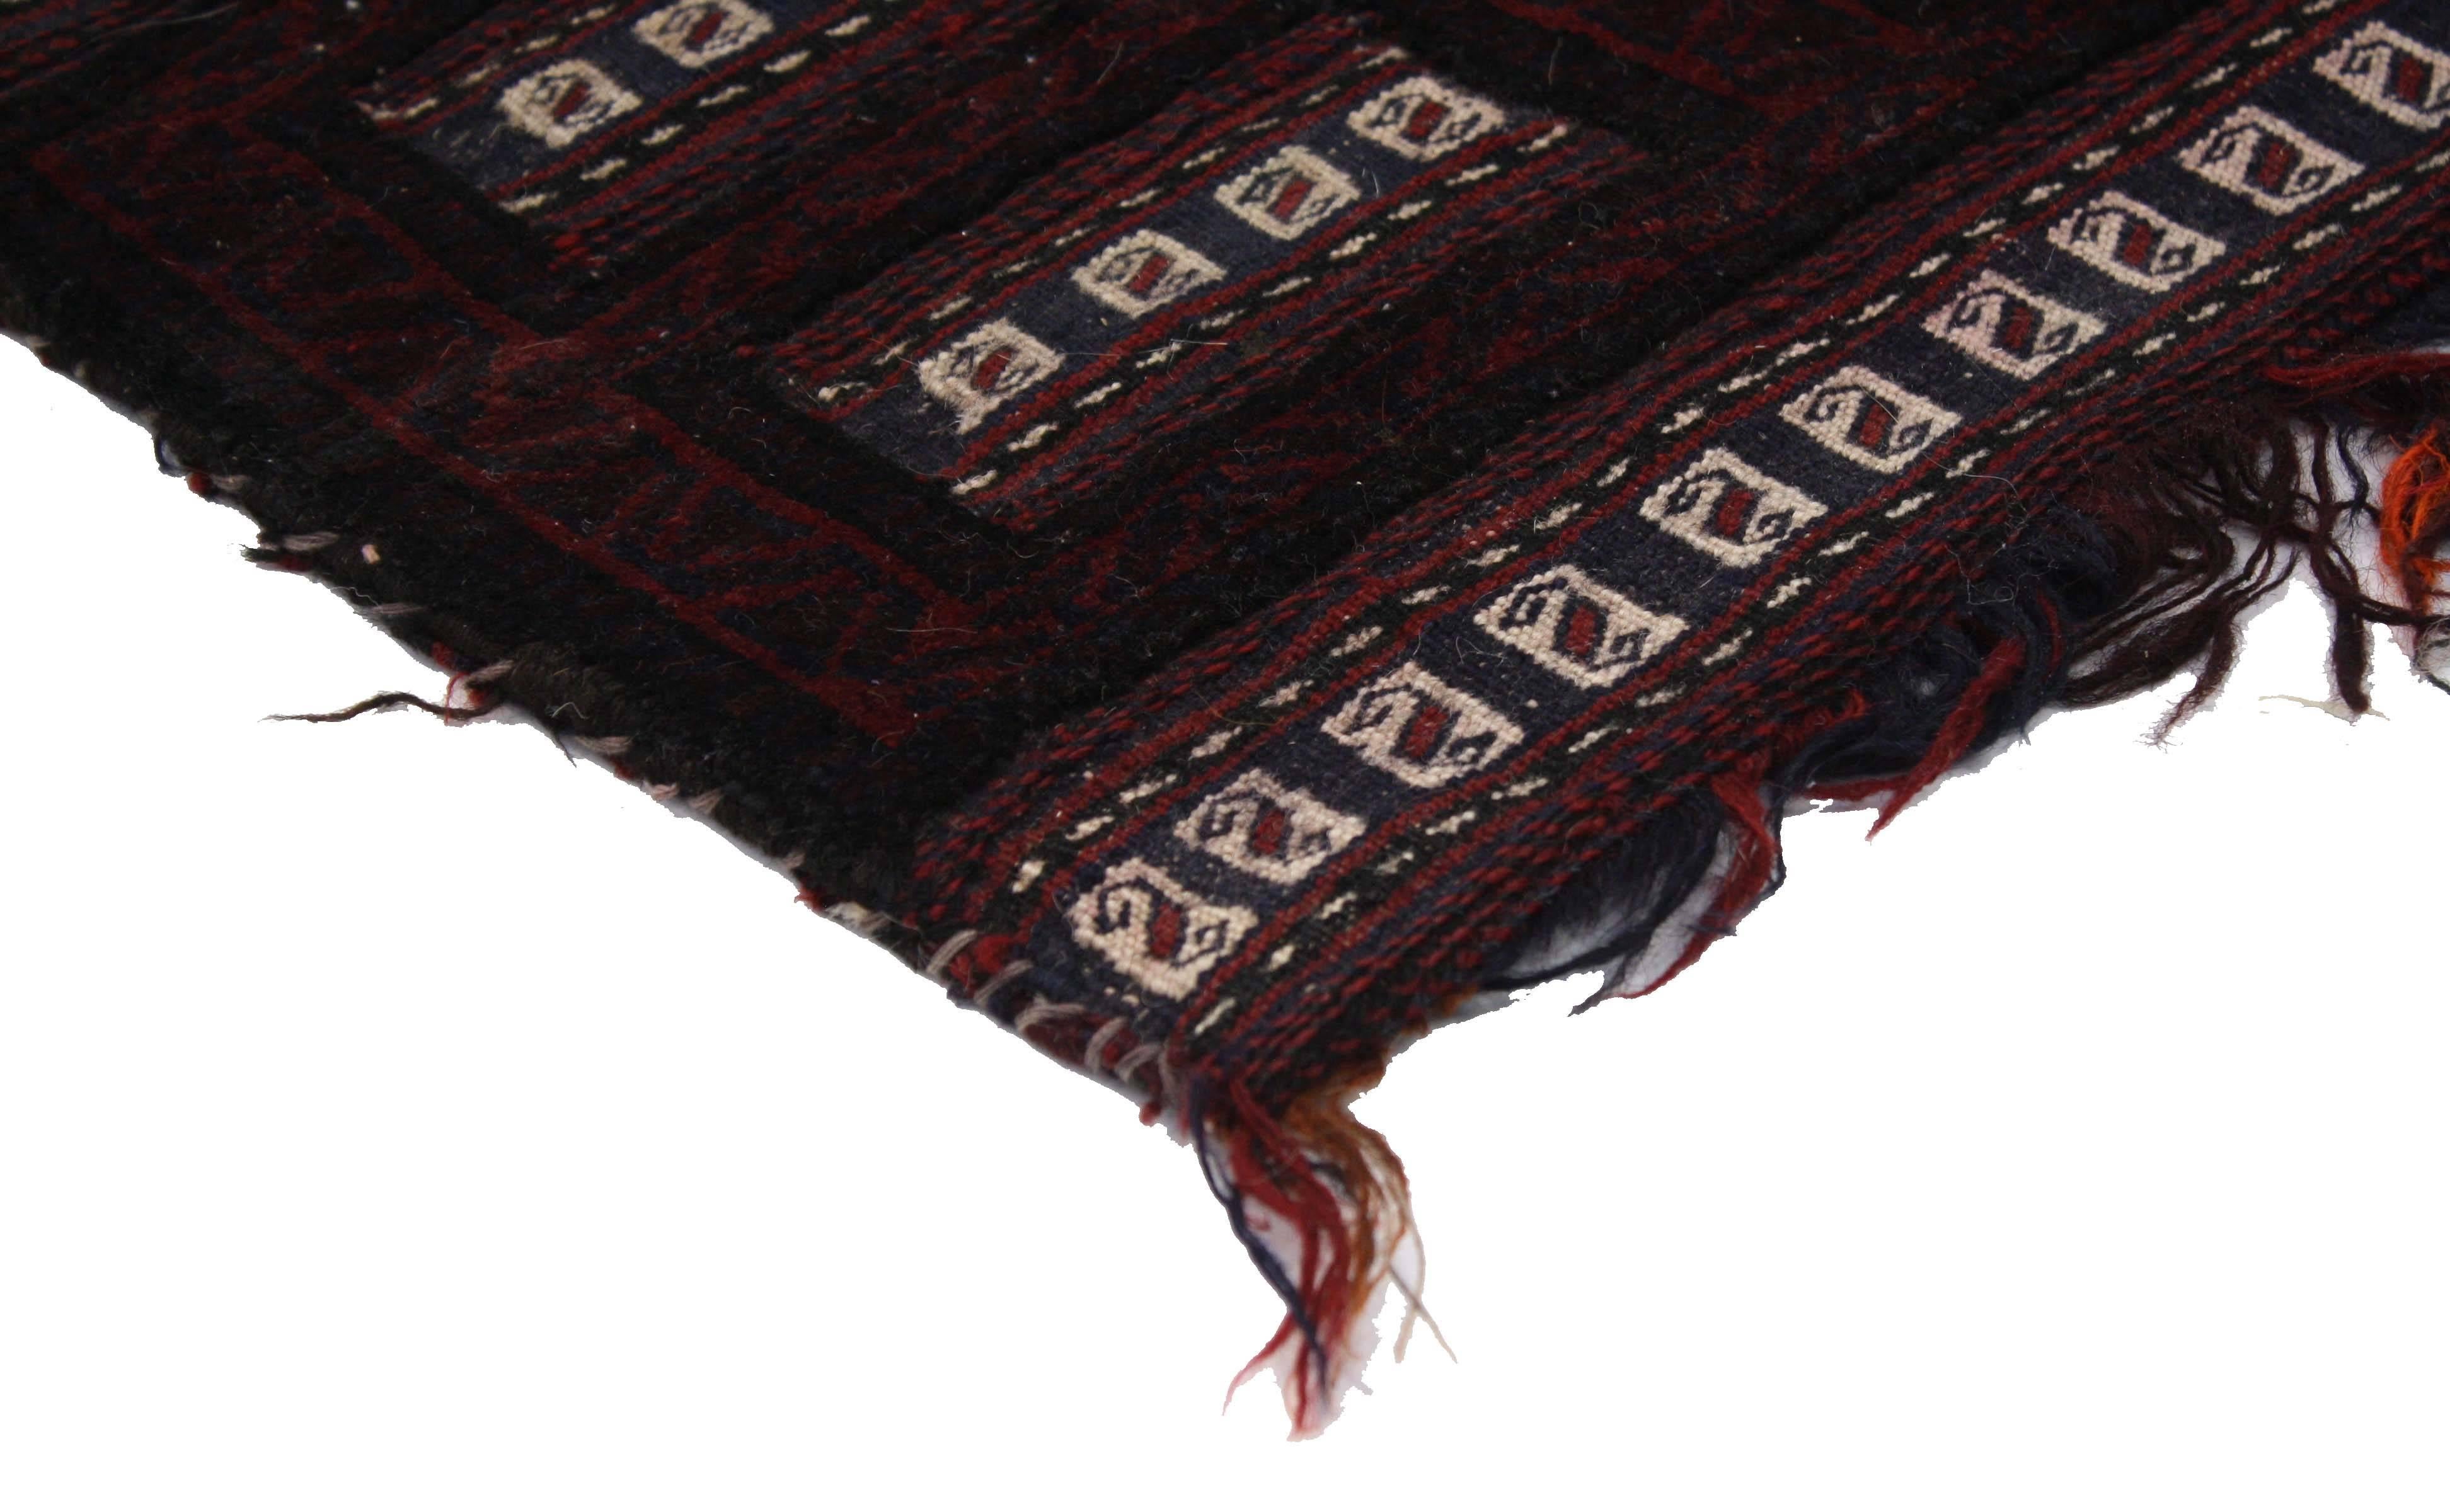 76638, antique Afghan Balouch salt bag, wall hanging, Afghan Tapestry, Tribal textile. This hand knotted wool antique Afghan Balouch salt bag features ancient tribal motifs, S-hooks, and uneven fringe hangs from the bottom. The Afghani Salt Bags